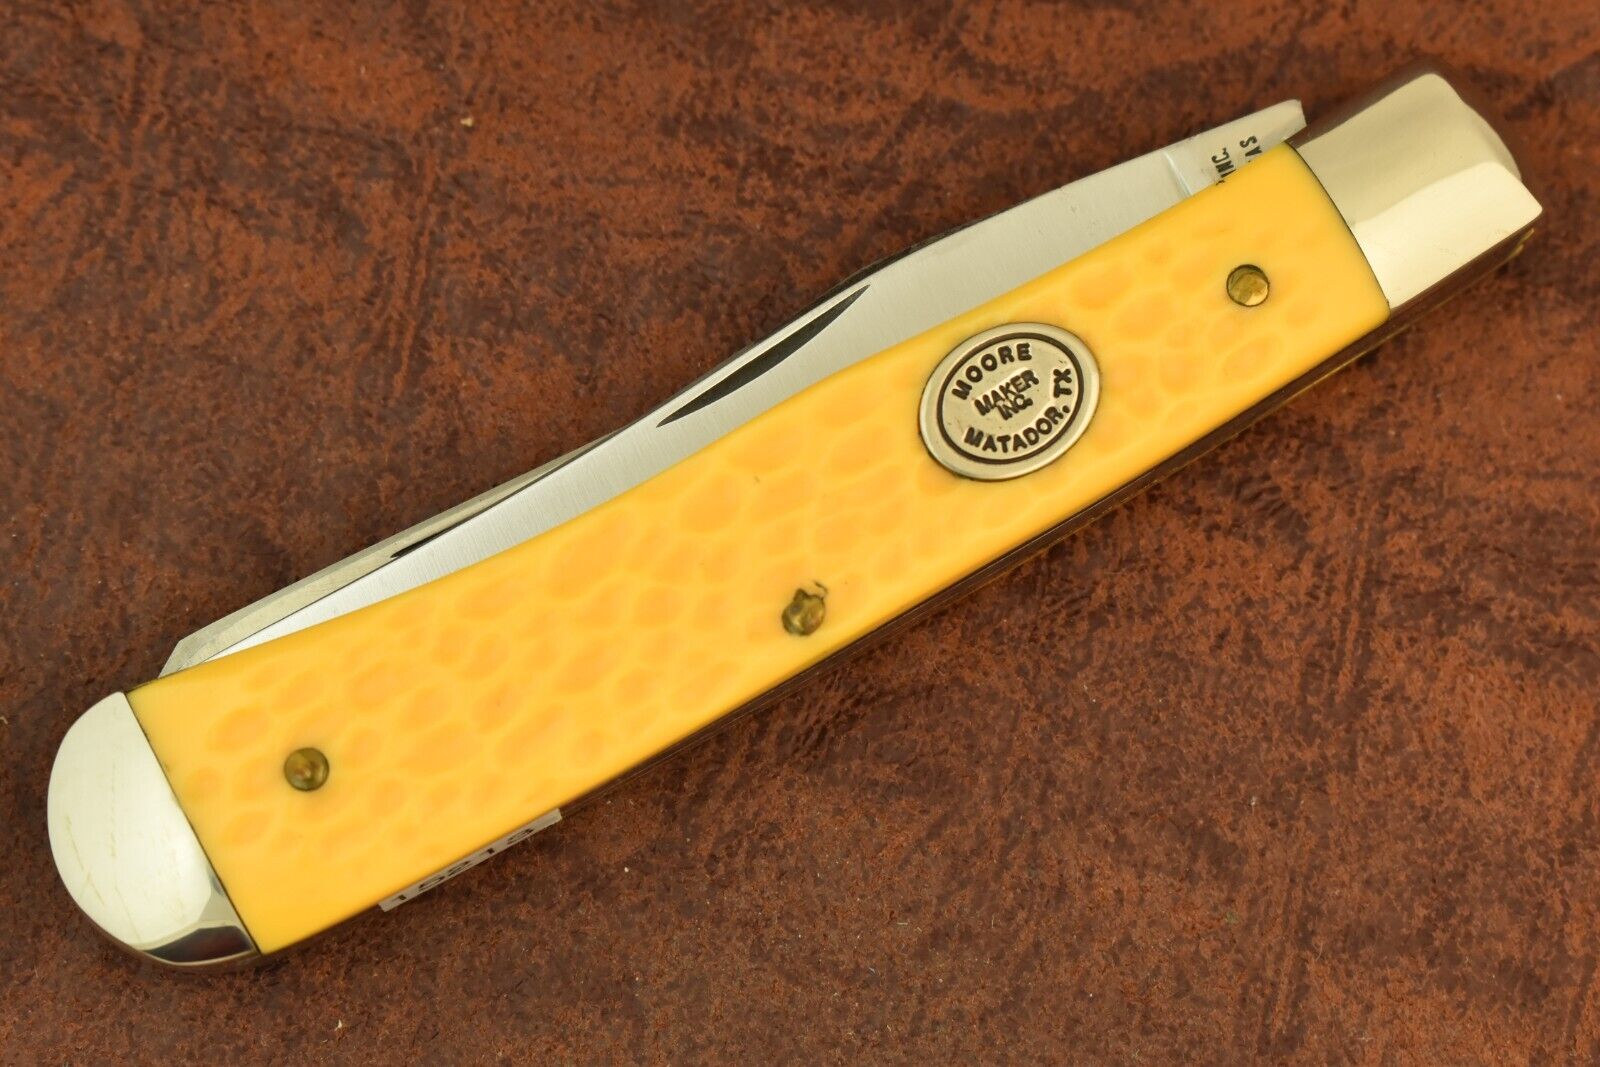 MOORE MAKER MADE IN USA by QUEEN CUTLERY CO YELLOW TRAPPER KNIFE MATADOR TEXAS